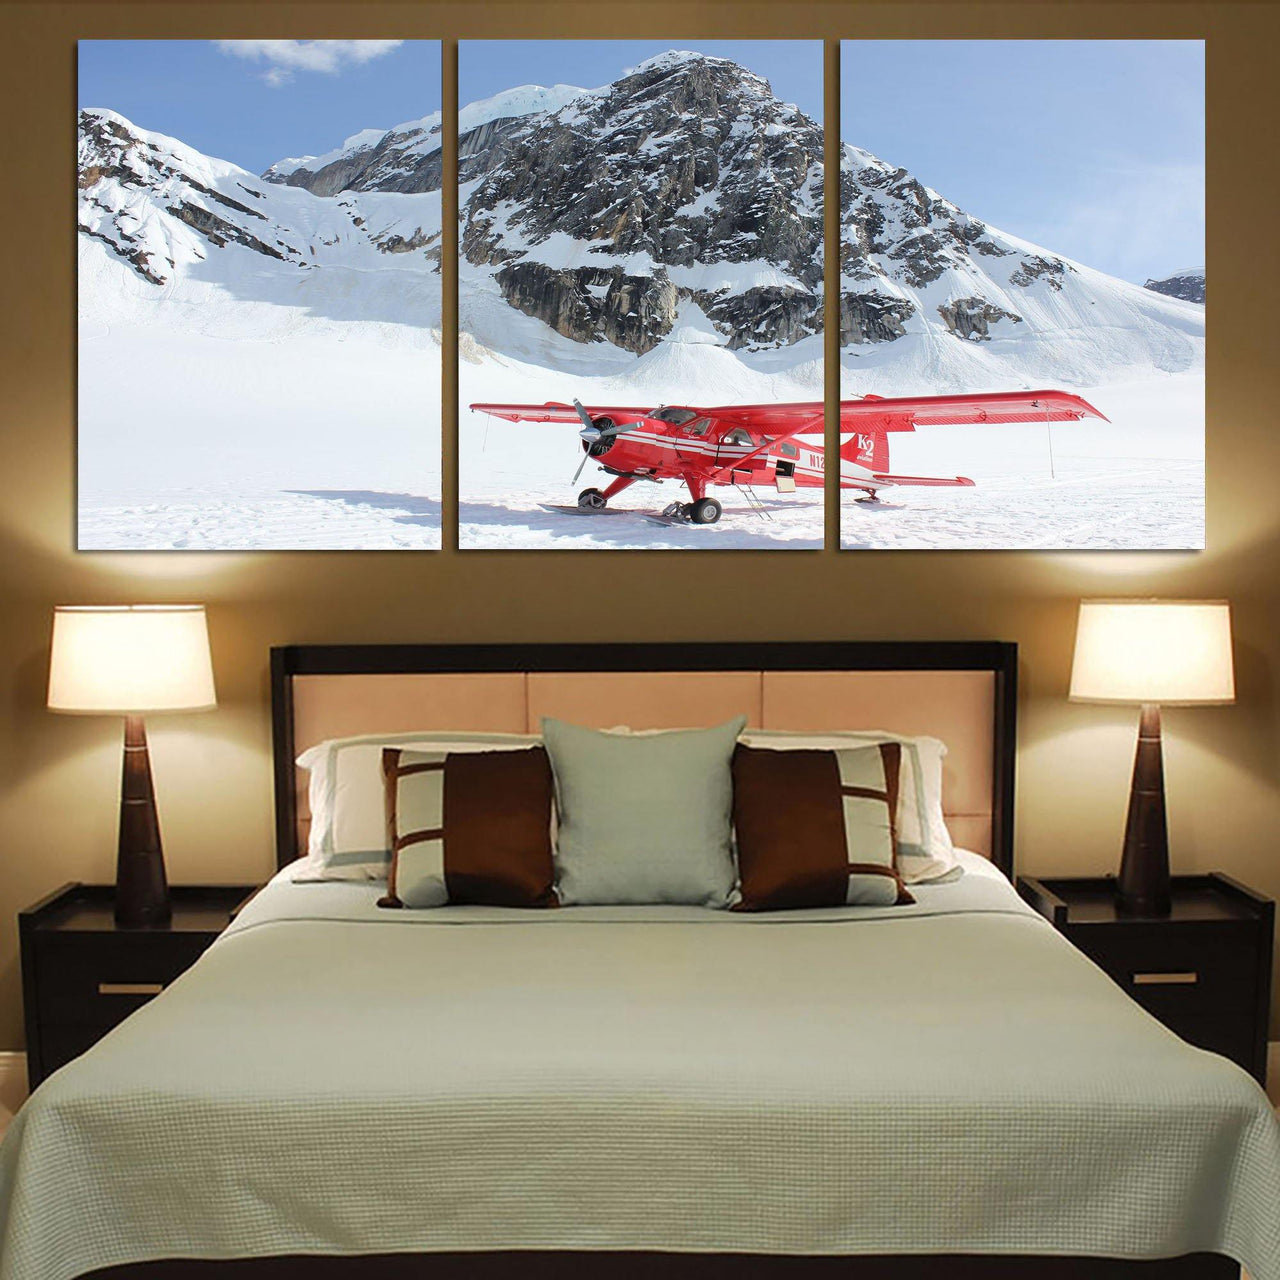 Amazing Snow Airplane Printed Canvas Posters (3 Pieces) Aviation Shop 